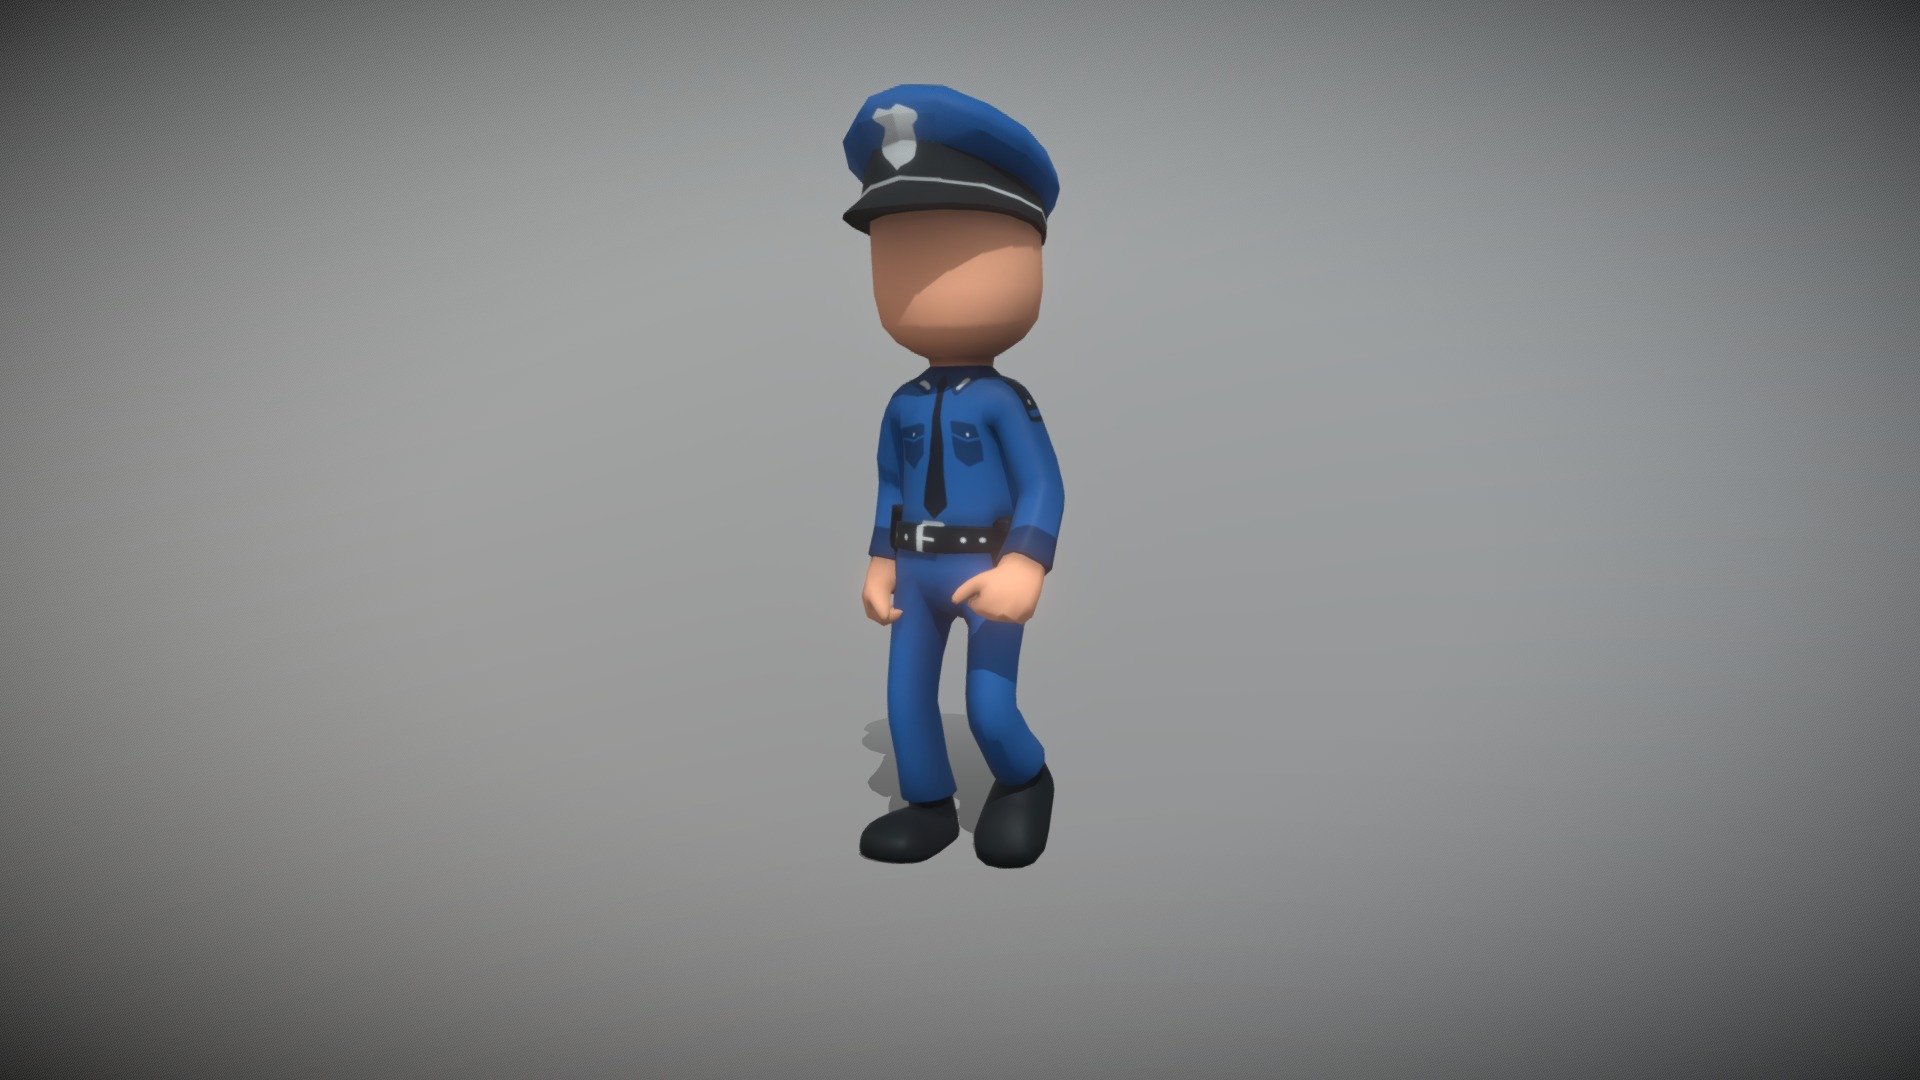 Lowpoly Toony Policeman:
- Lowpoly (Tris: 3064- Verts: 1548)
- Game ready with Unity Package, optimized
-  Texture Maps includes: Basecolor
-  Model is created in Maya, other files supported includes: Blender, FBX, Glb/Gltf, Unity
-  Rigged with Maya HumanIK, can use other mocap animations based on humanoid bones

16 animations:
- T-pose: 0-10
- Walk: 15-46
- Run: 49-70
- Idle: 75-373
- Jump: 380-437
- Falling: 445-466
- GetHit: 470-513
- Idle_Crouch: 520-720
- Walk_Sneaking: 725-775
- Climb: 780-840
- Idle_Punch: 850-939
- Attack_Punch: 950-976
- Idle_HoldGun: 990-1030
- Walk_HoldGun: 1040 -1064
- Attack_Gun: 1070-1105
- Crawl: 1110-1130
- Dead: 1140-1218 - Lowpoly Toony Policeman Rigged and Animated - Buy Royalty Free 3D model by Dzung Dinh (@hugechimera) 3d model